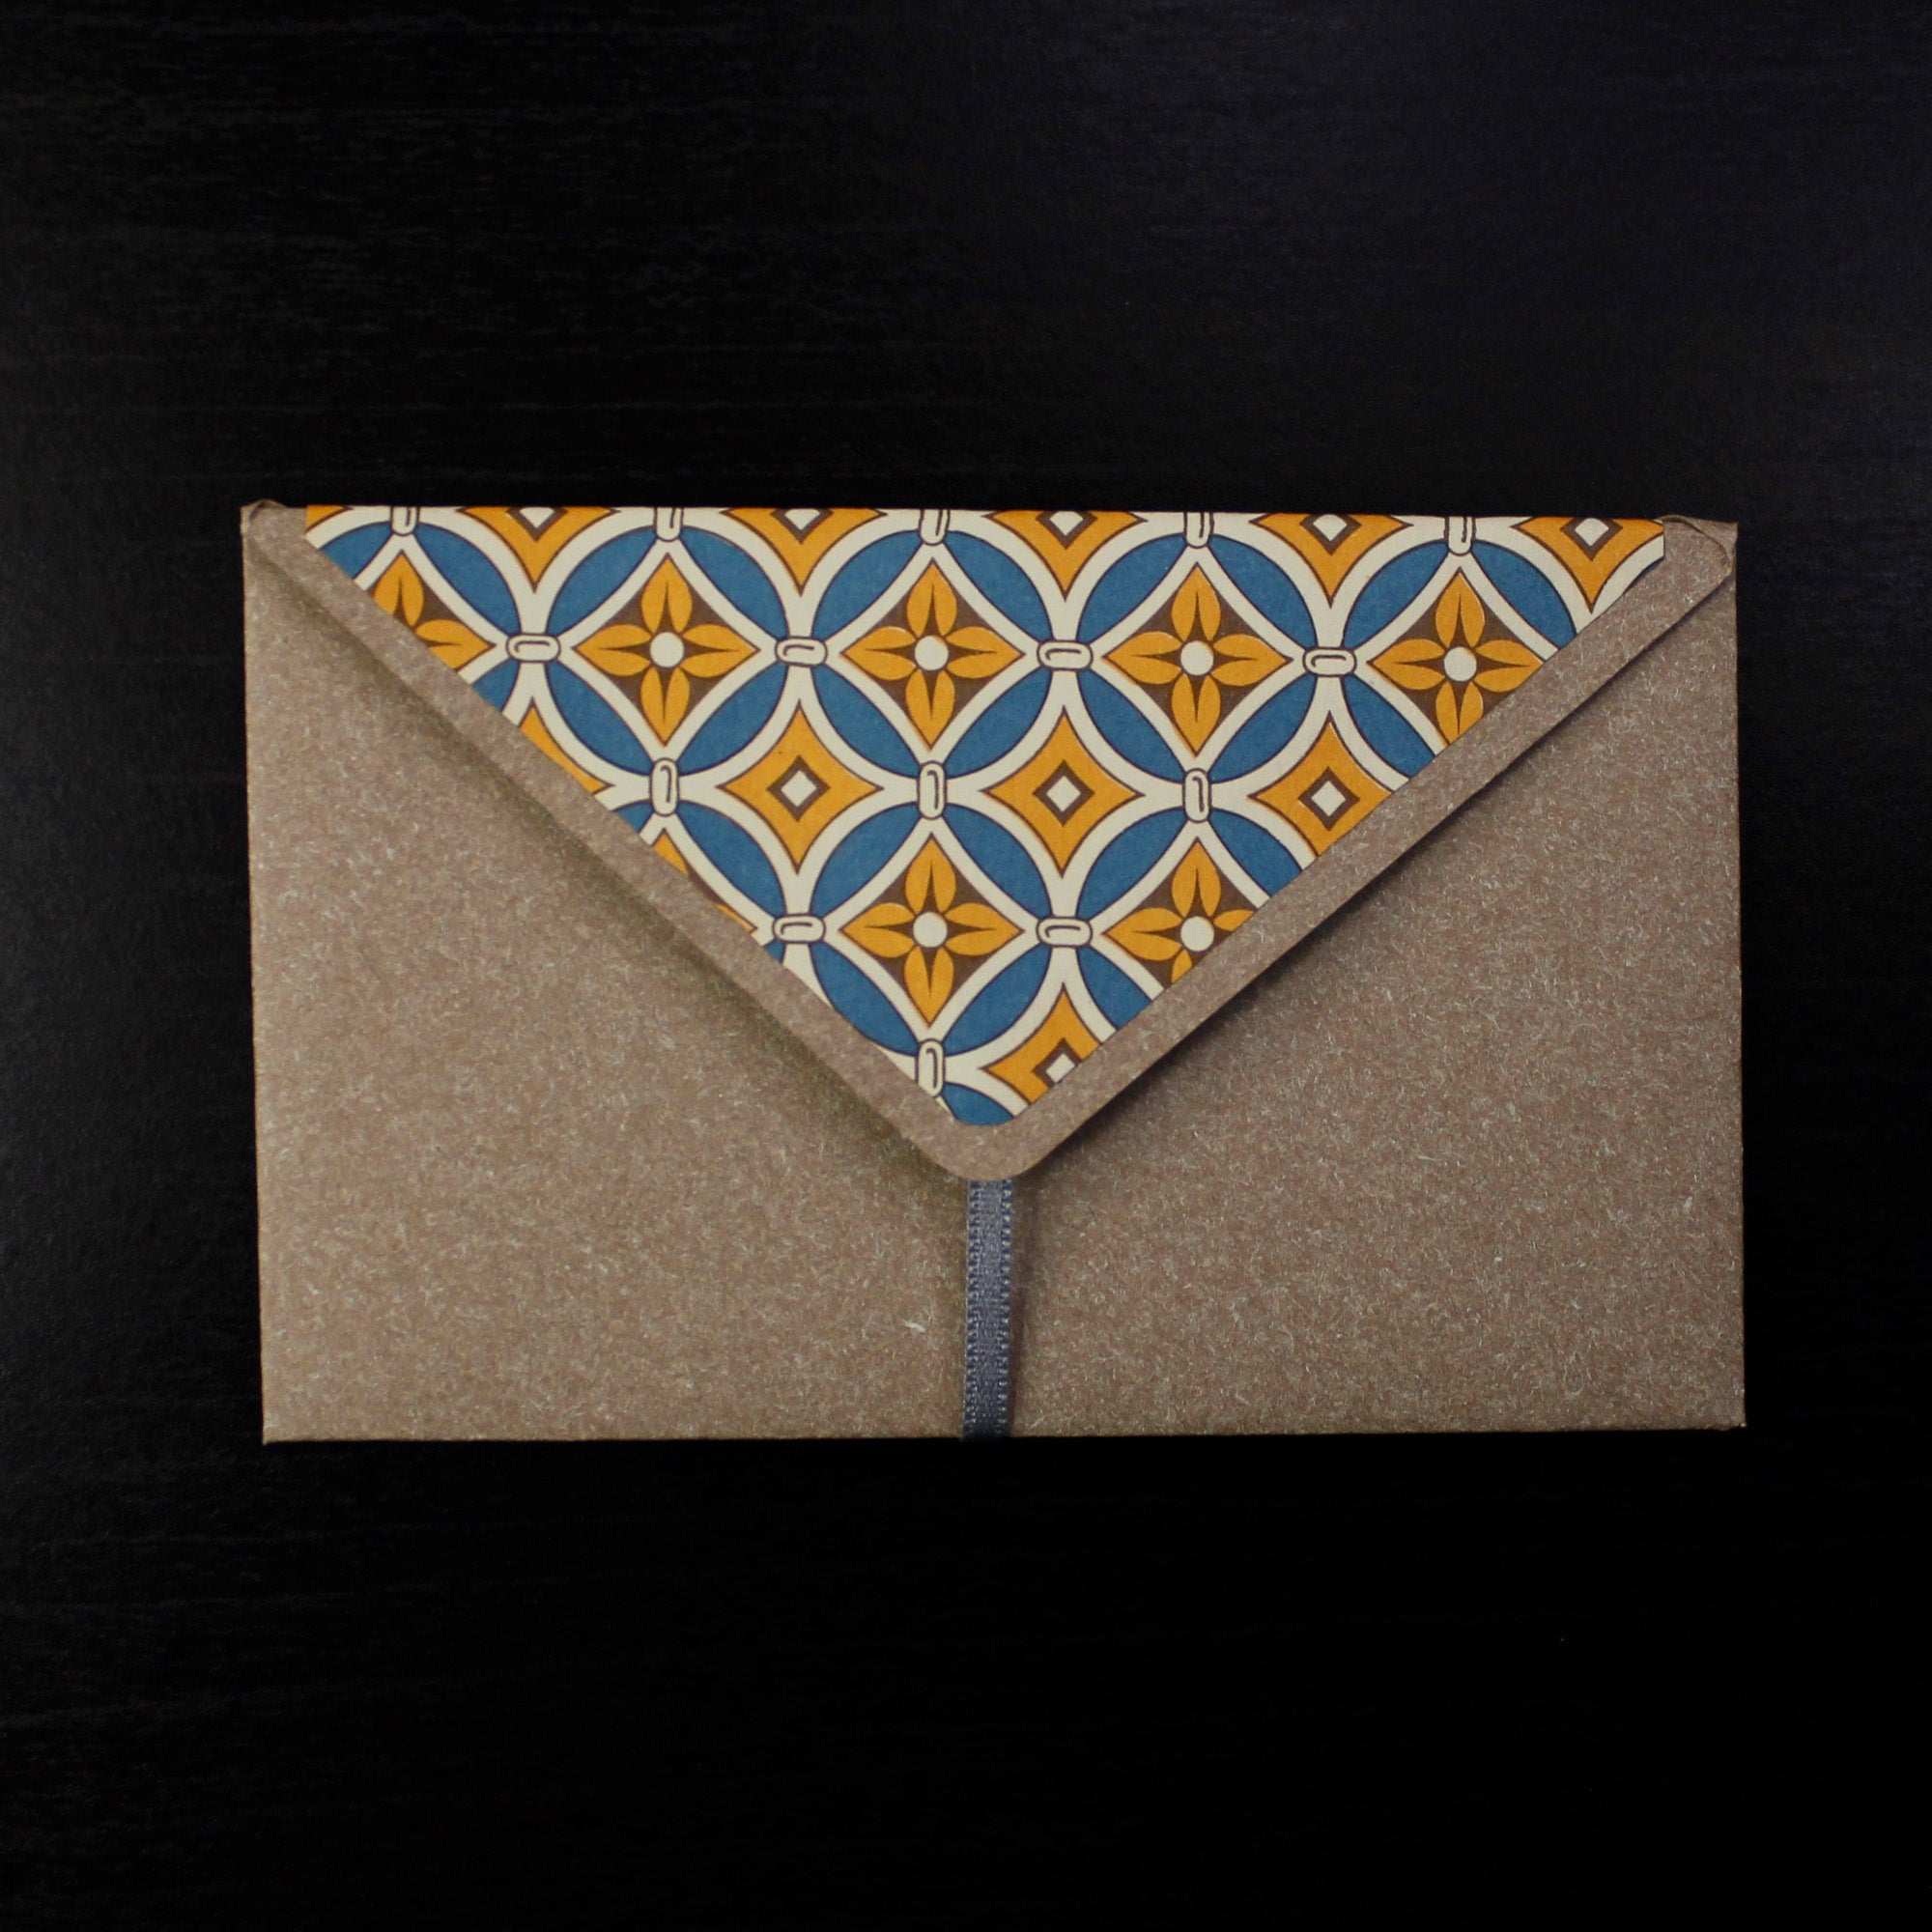 Small Charming Envelope and Note Card with a Secret